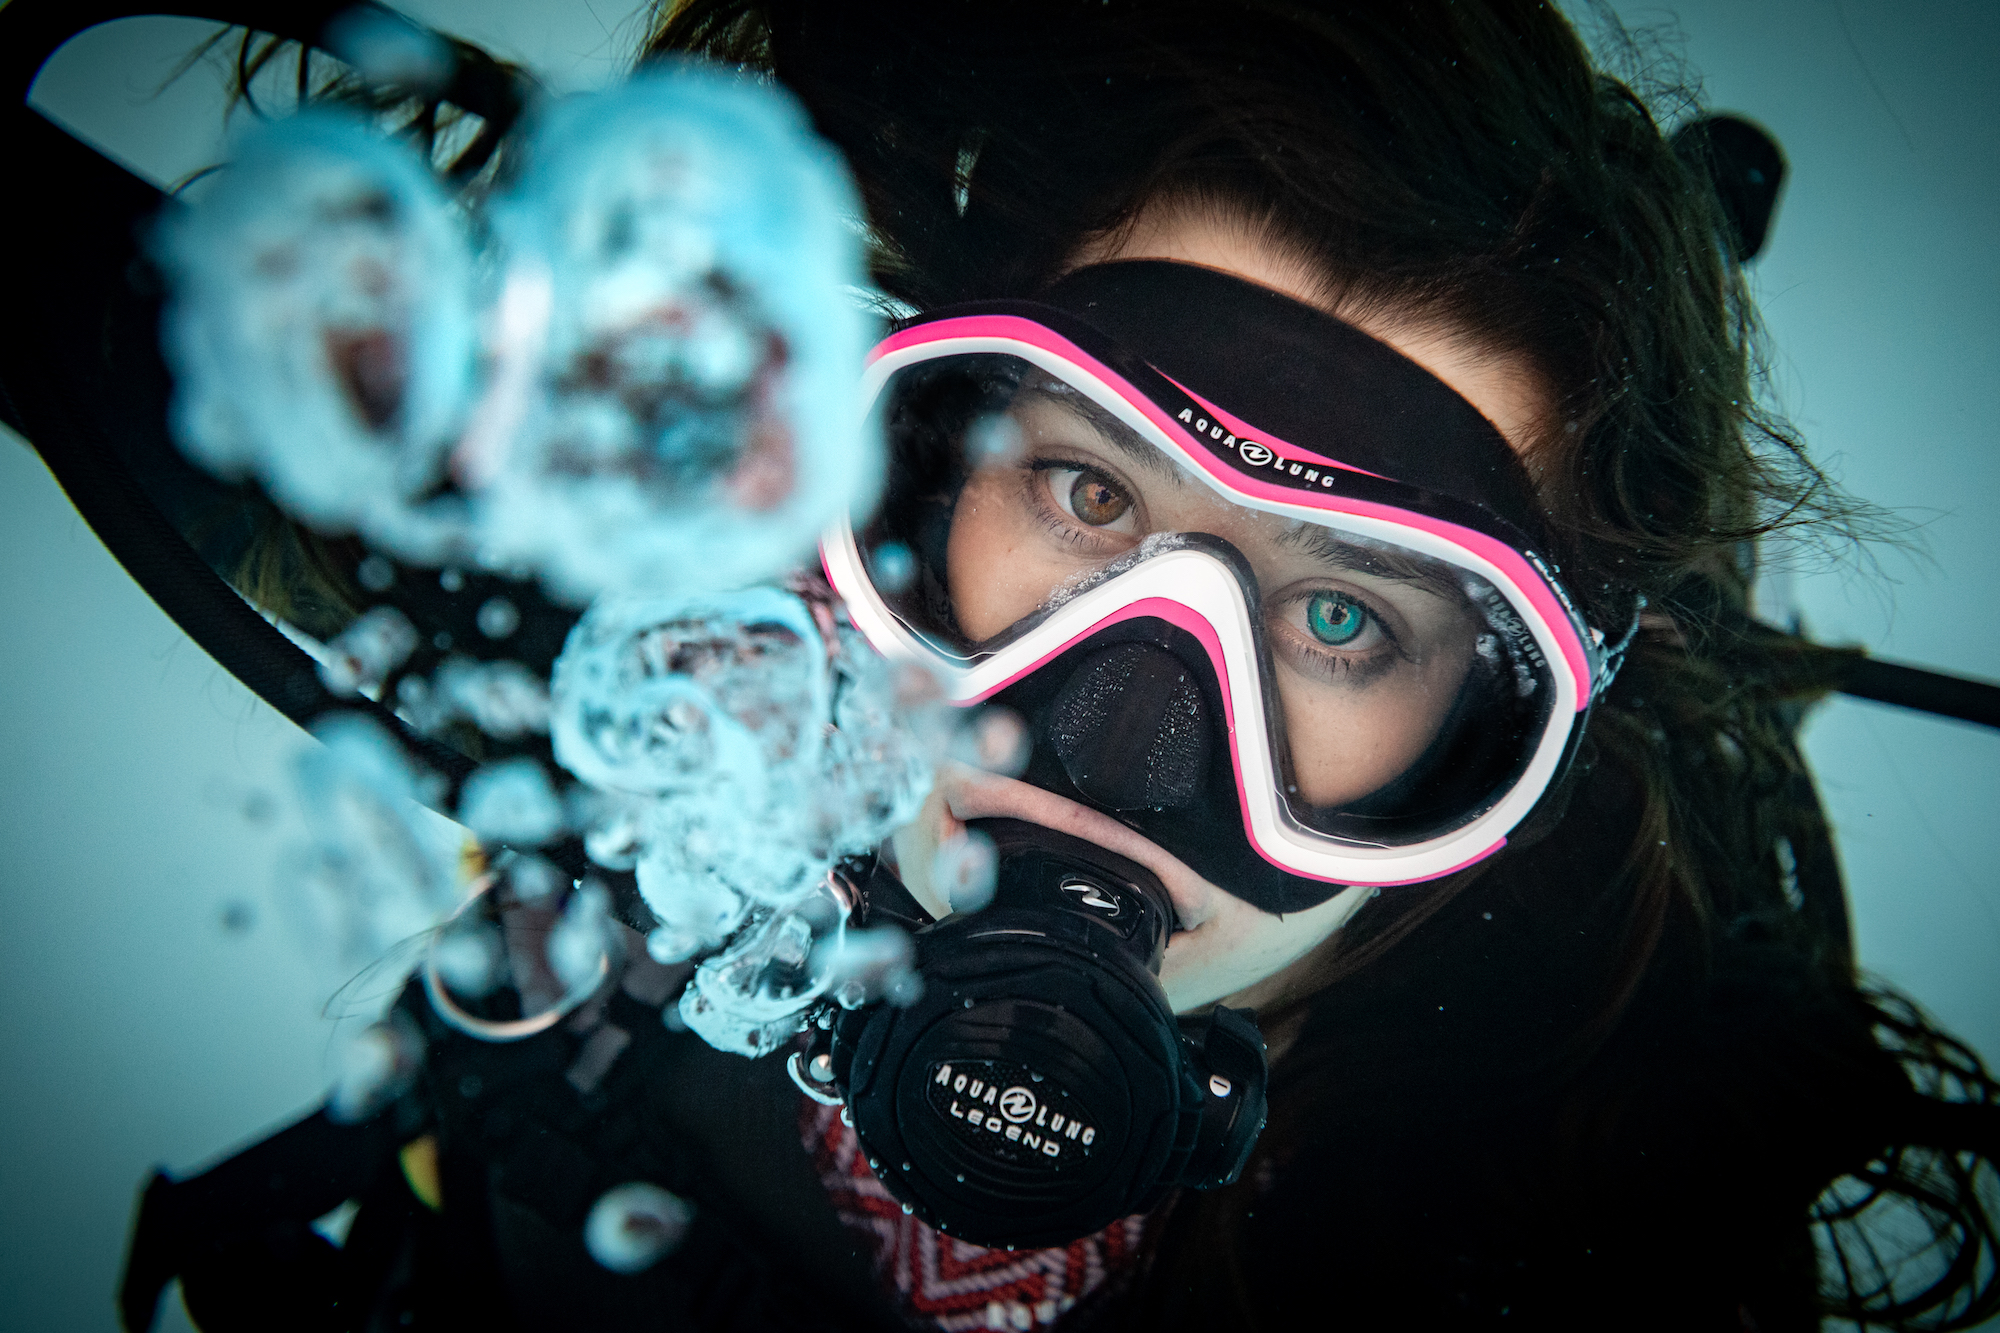 A diver in a pink mask clearing their airway and exhaling bubbles through their regulator after coughing or sneezing